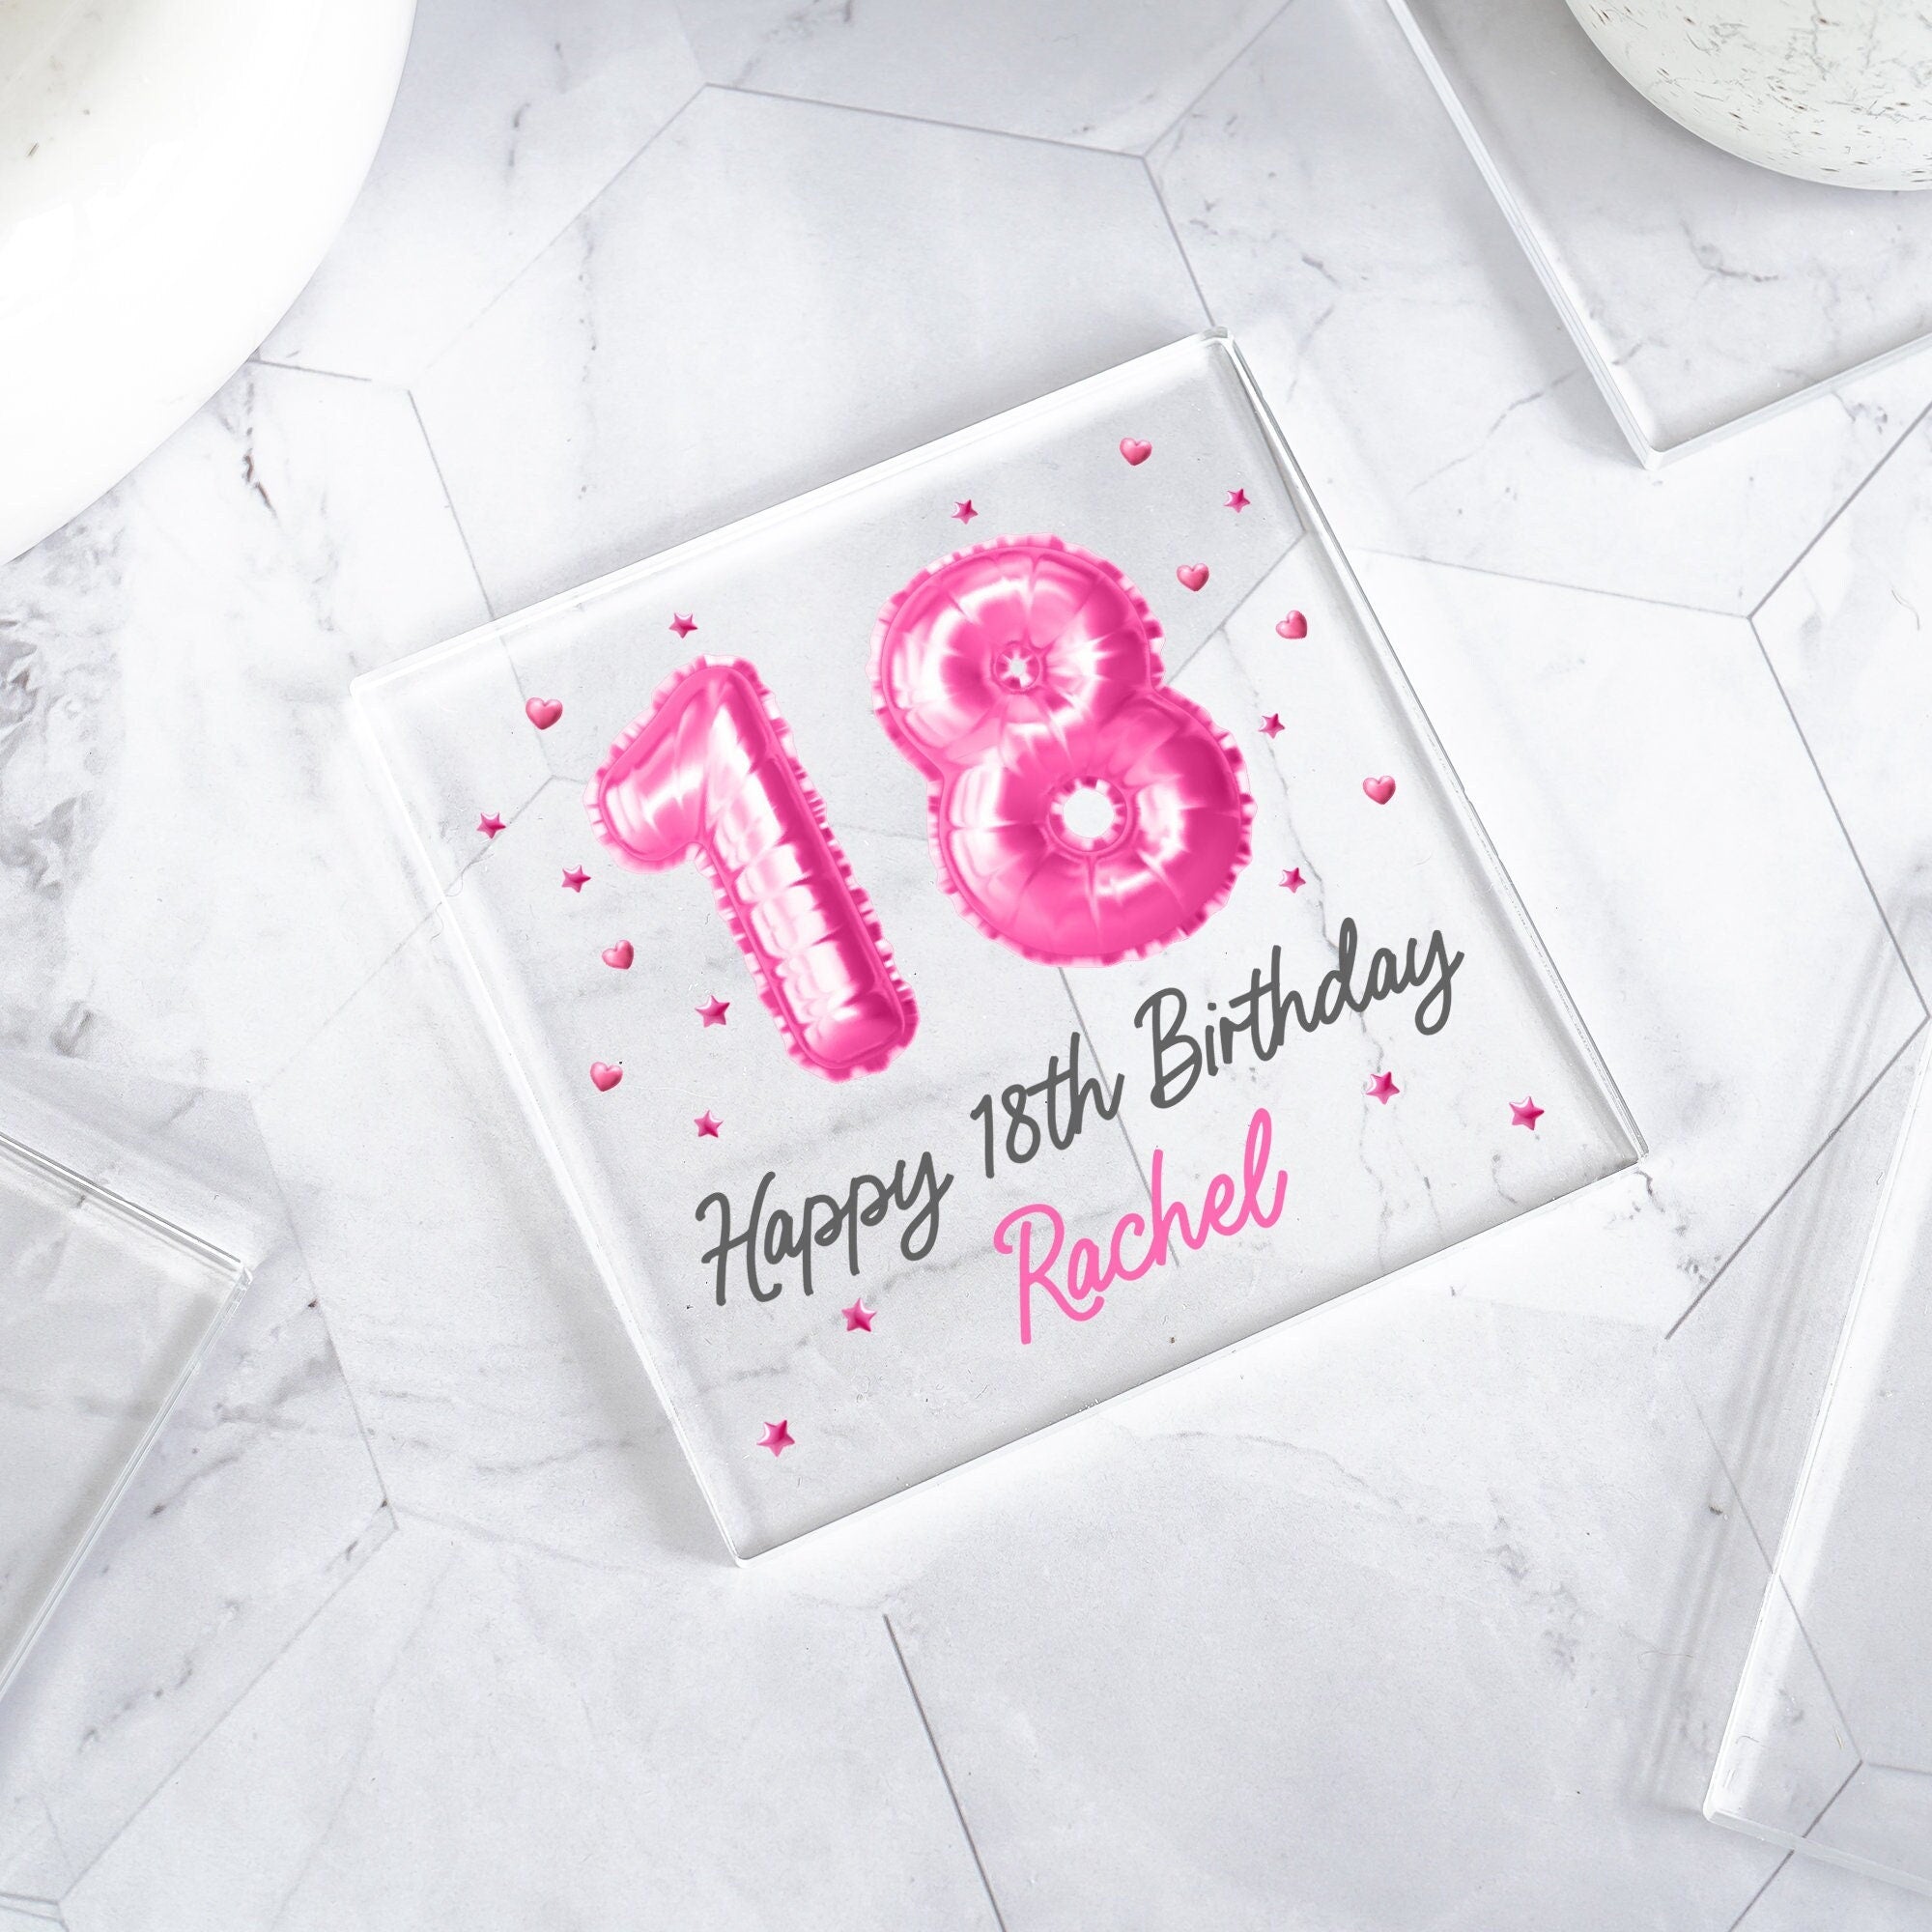 Personalised 18th Birthday Coaster, Pink Birthday Coaster, 18th Birthday Gifts, Birthday Coasters, Pink 18th Birthday Gifts For Her